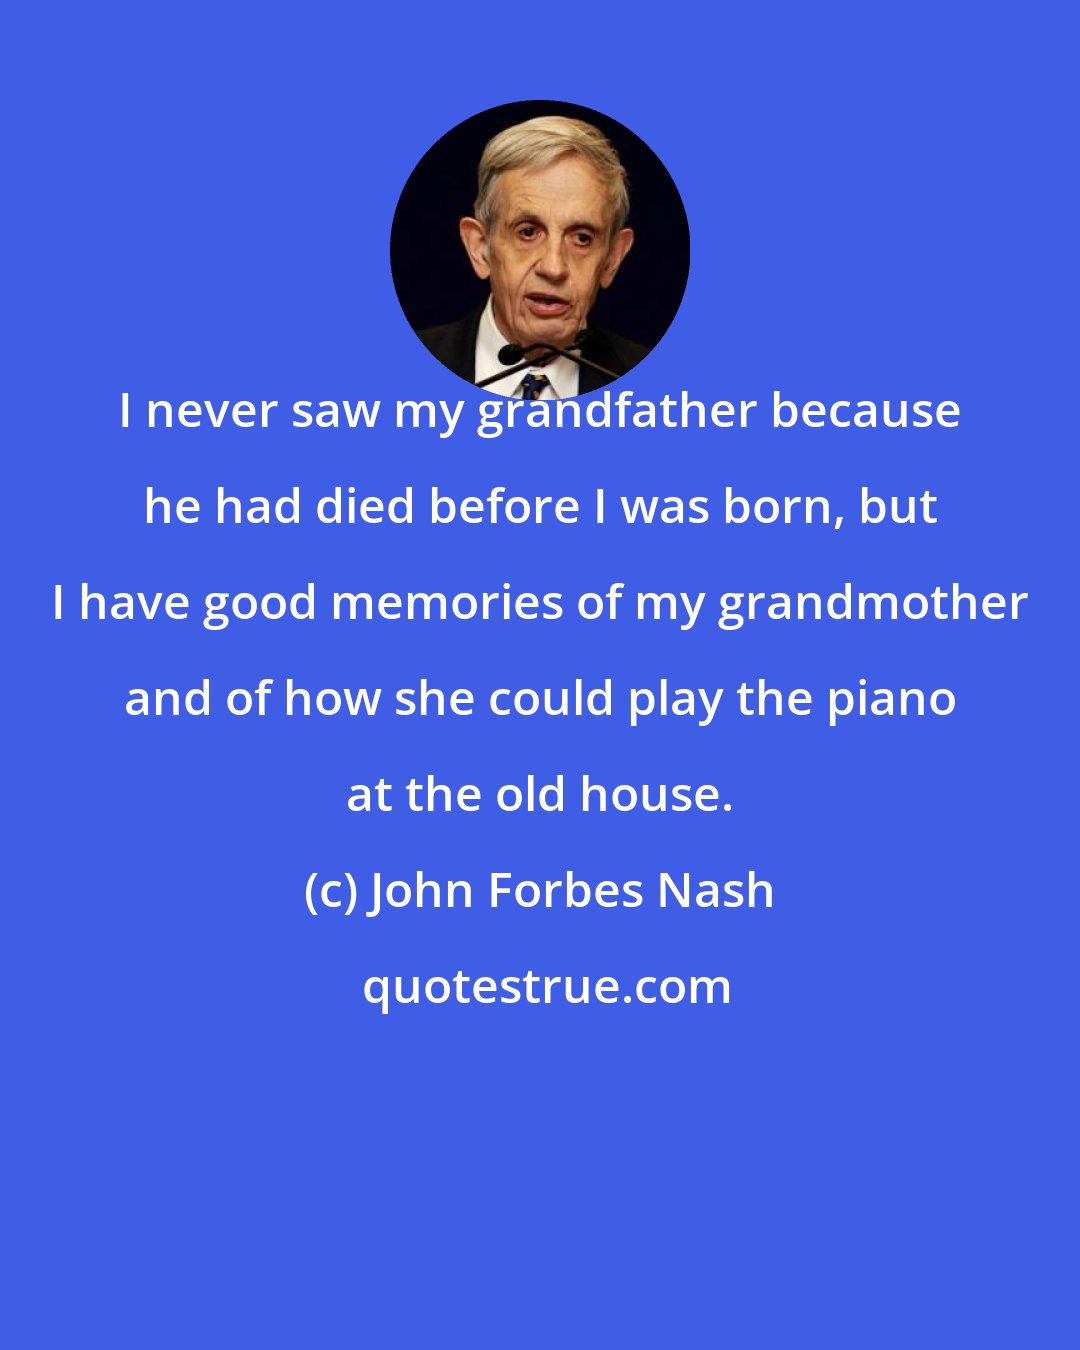 John Forbes Nash: I never saw my grandfather because he had died before I was born, but I have good memories of my grandmother and of how she could play the piano at the old house.